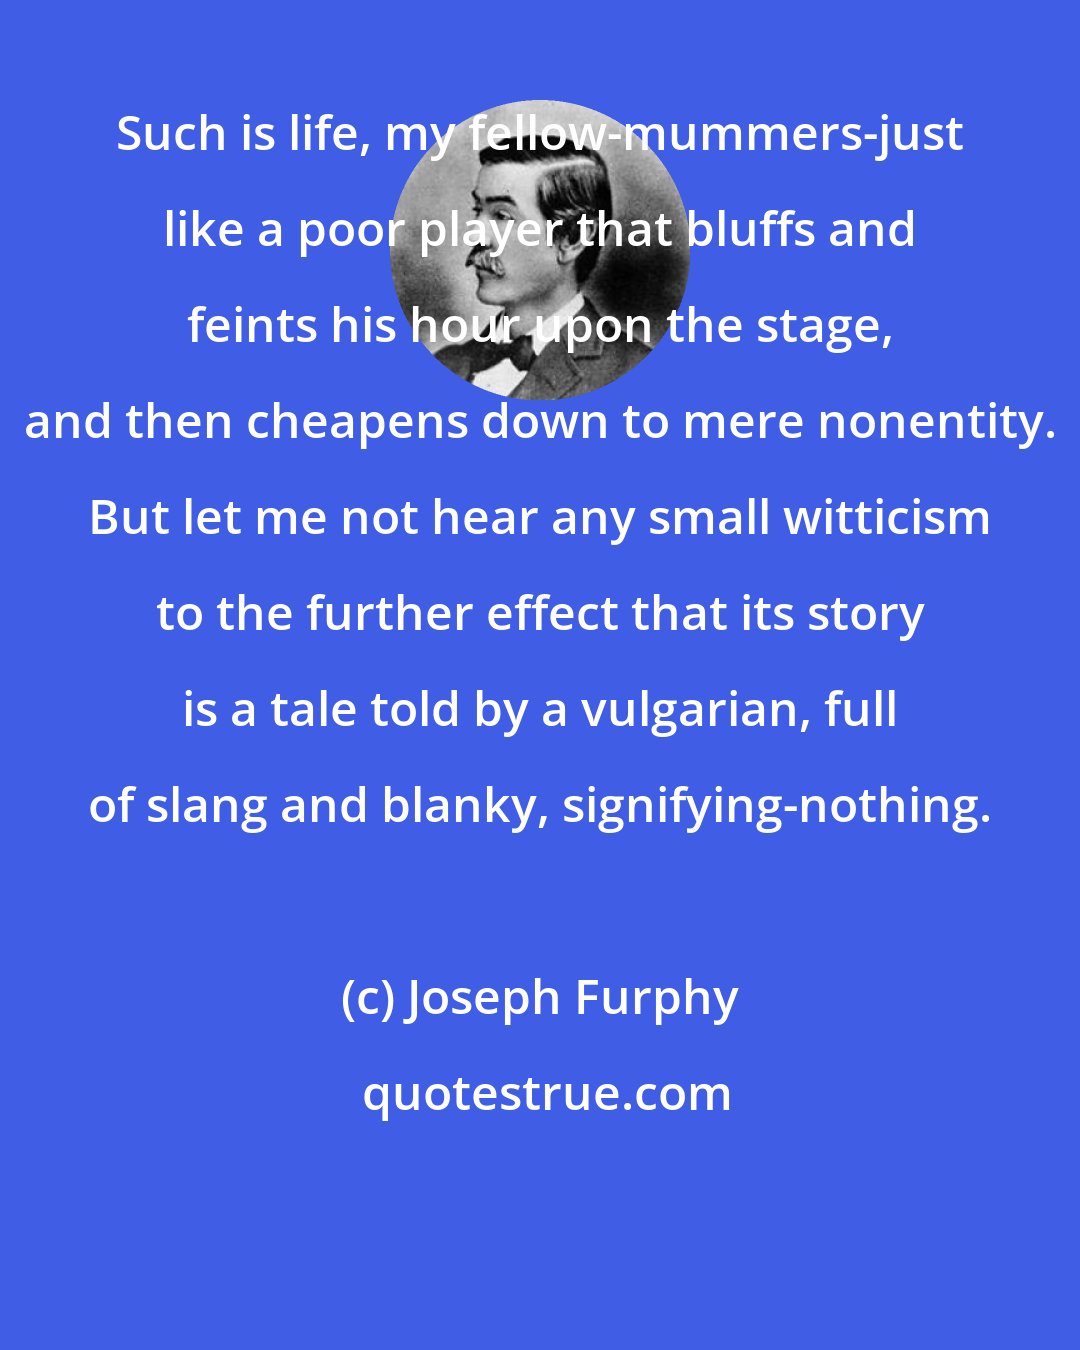 Joseph Furphy: Such is life, my fellow-mummers-just like a poor player that bluffs and feints his hour upon the stage, and then cheapens down to mere nonentity. But let me not hear any small witticism to the further effect that its story is a tale told by a vulgarian, full of slang and blanky, signifying-nothing.